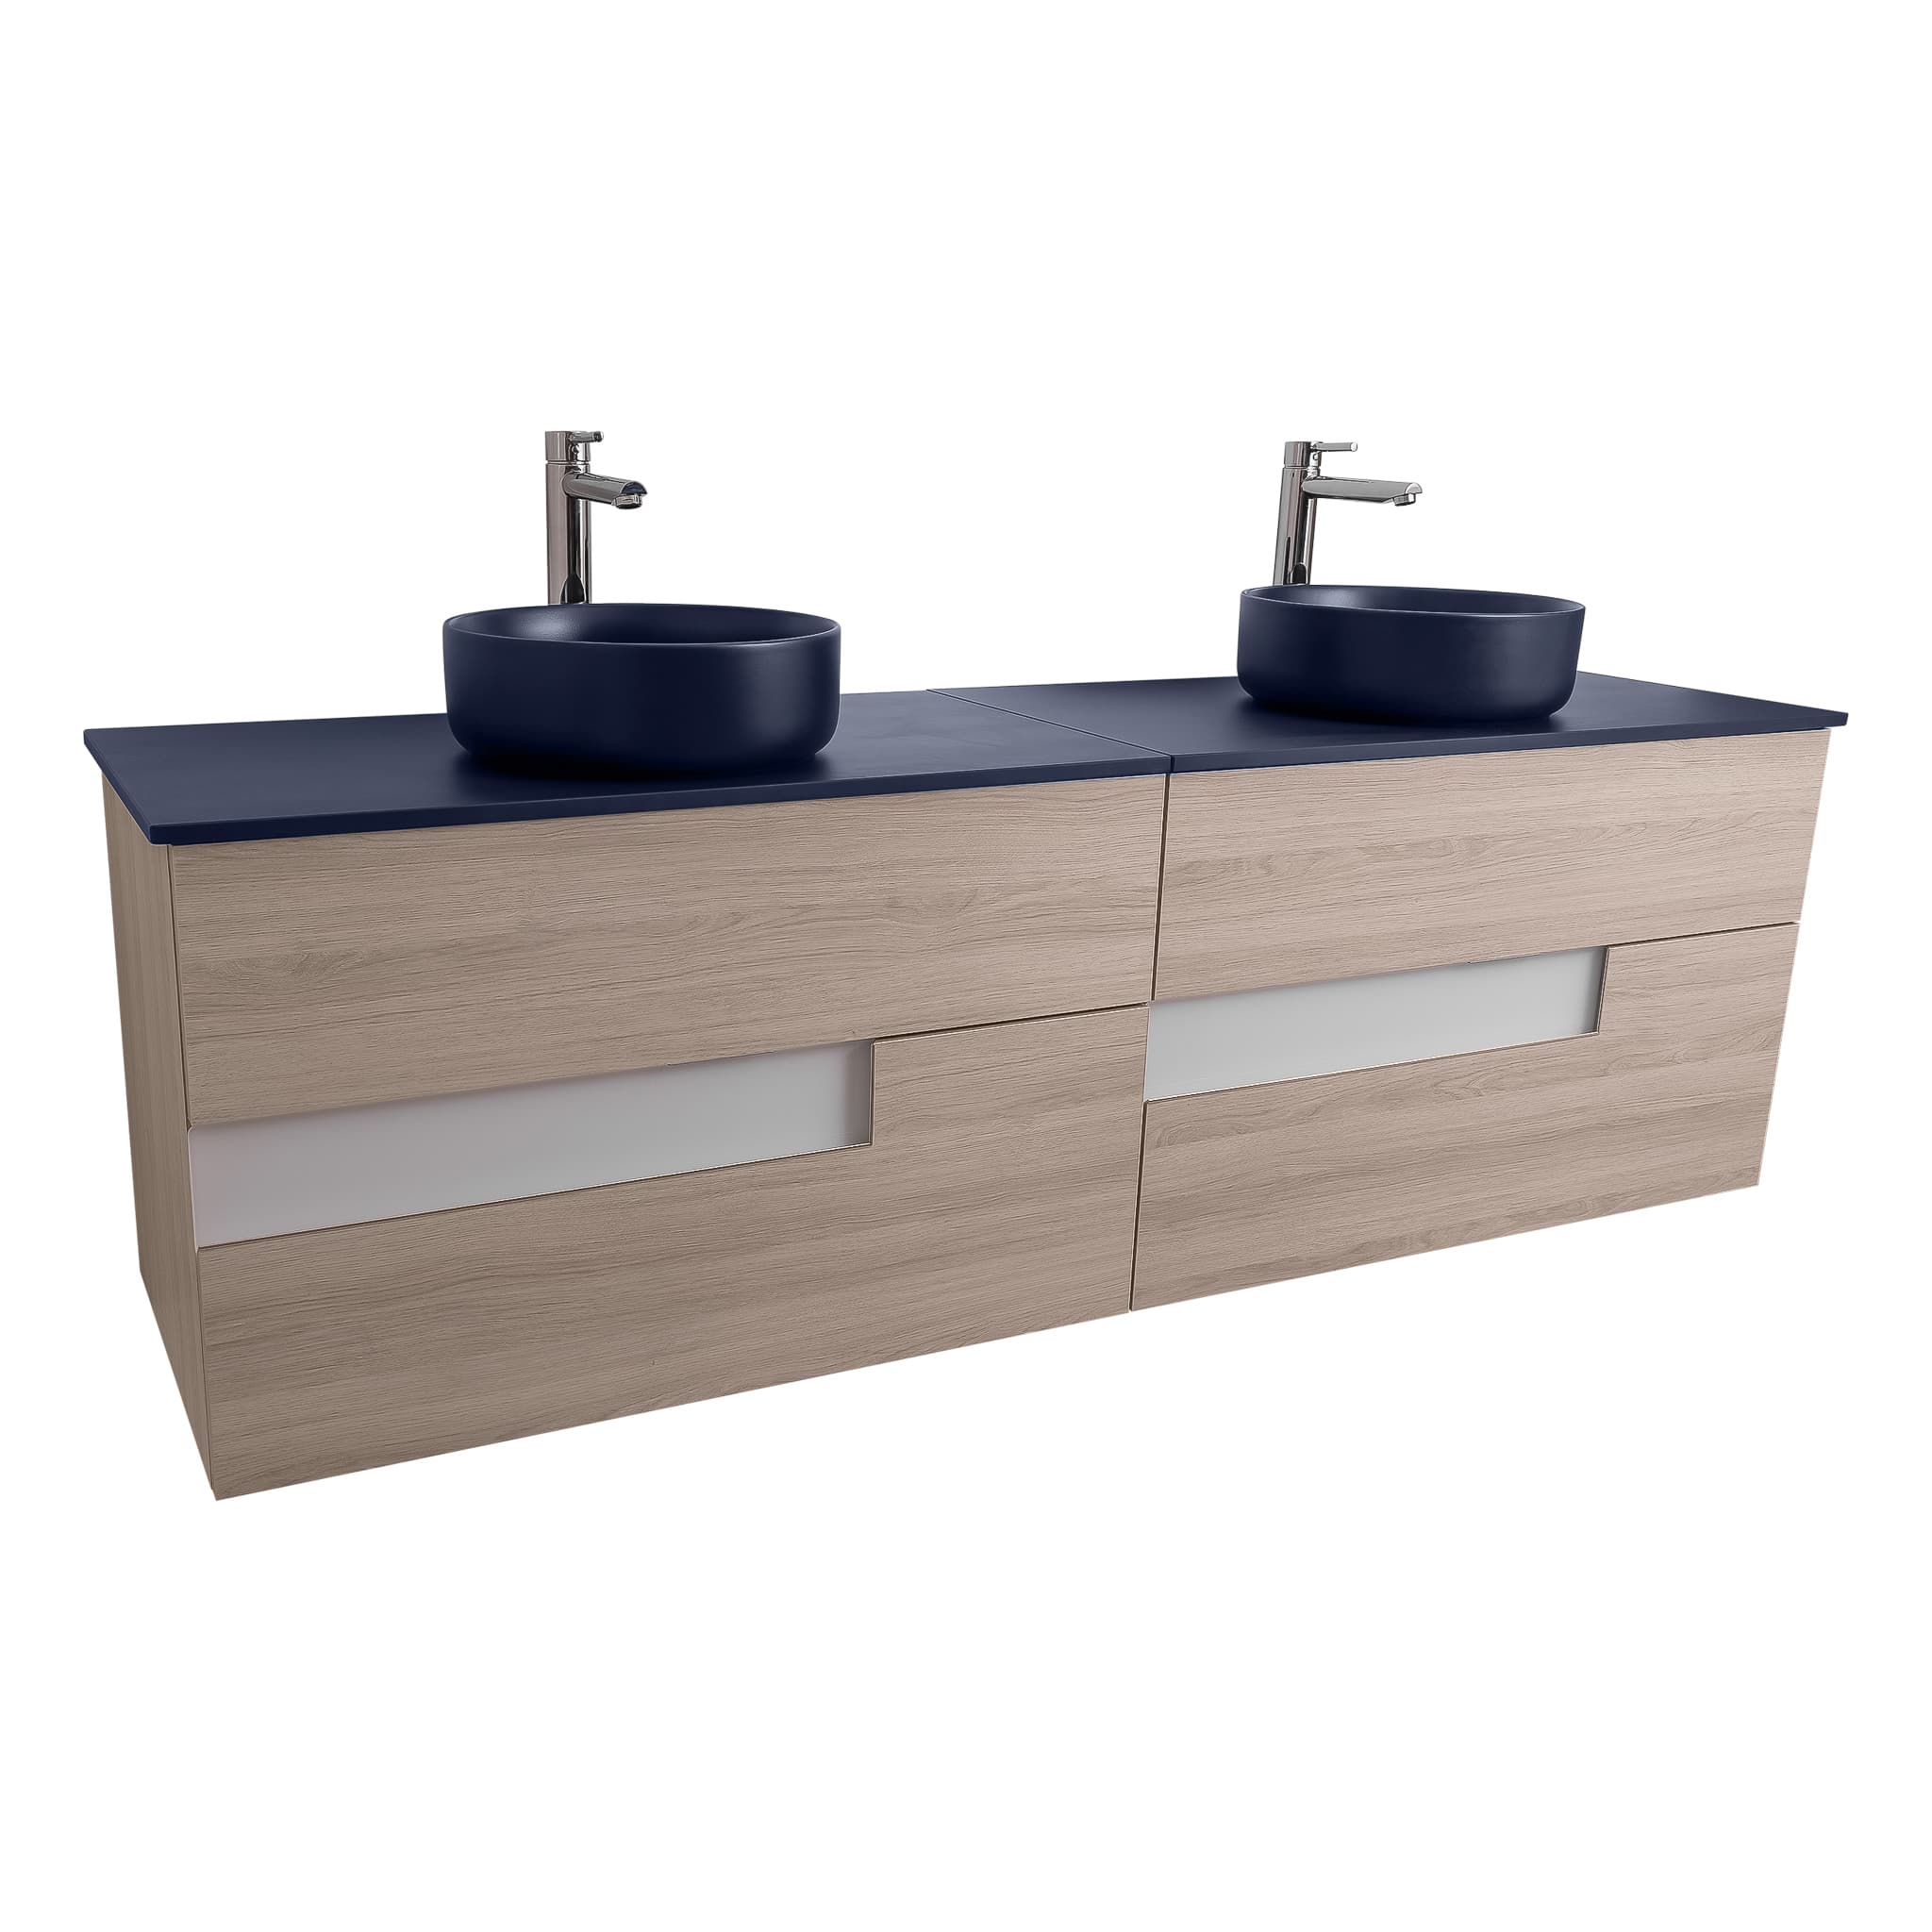 Vision 63 Natural Light Wood Cabinet, Ares Navy Blue Top And Two Ares Navy Blue Ceramic Basin, Wall Mounted Modern Vanity Set